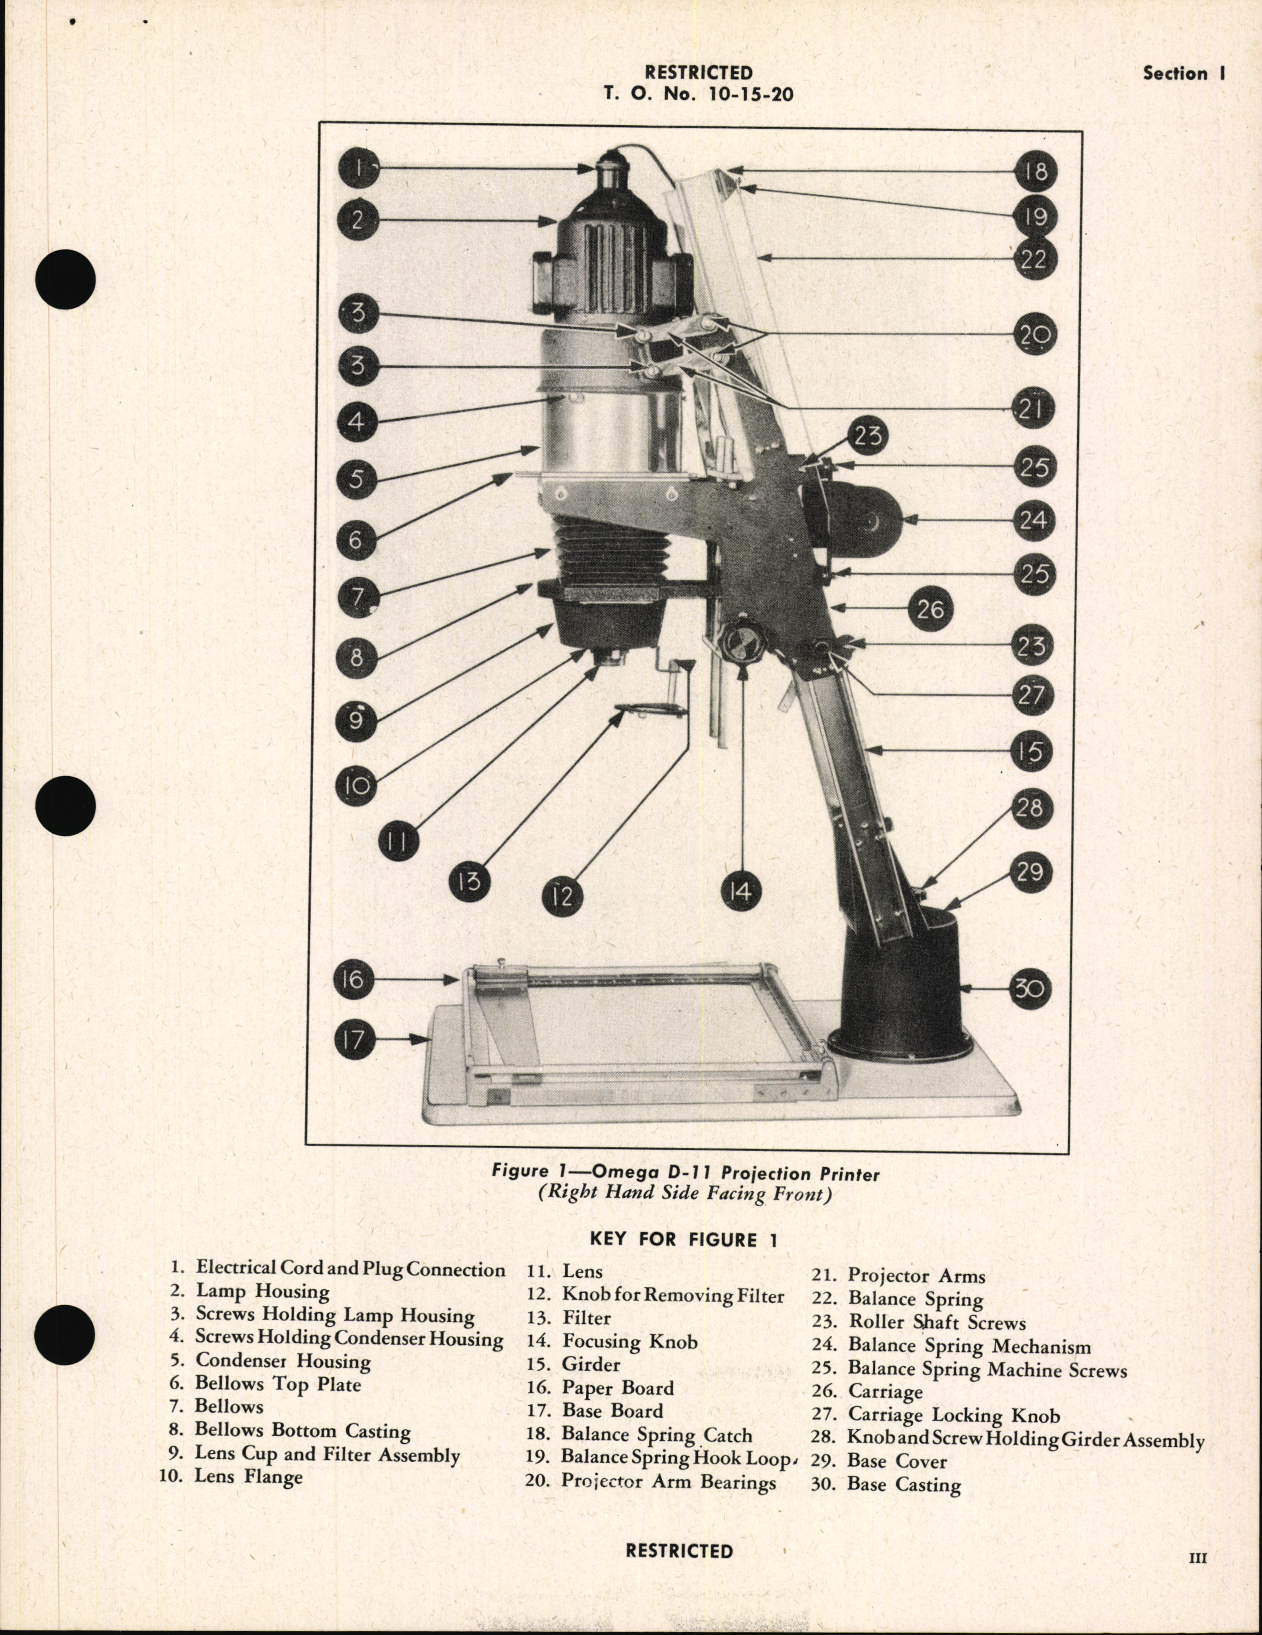 Sample page 5 from AirCorps Library document: Handbook of Instructions with Parts Catalog for Omega D-11 Projection Printer